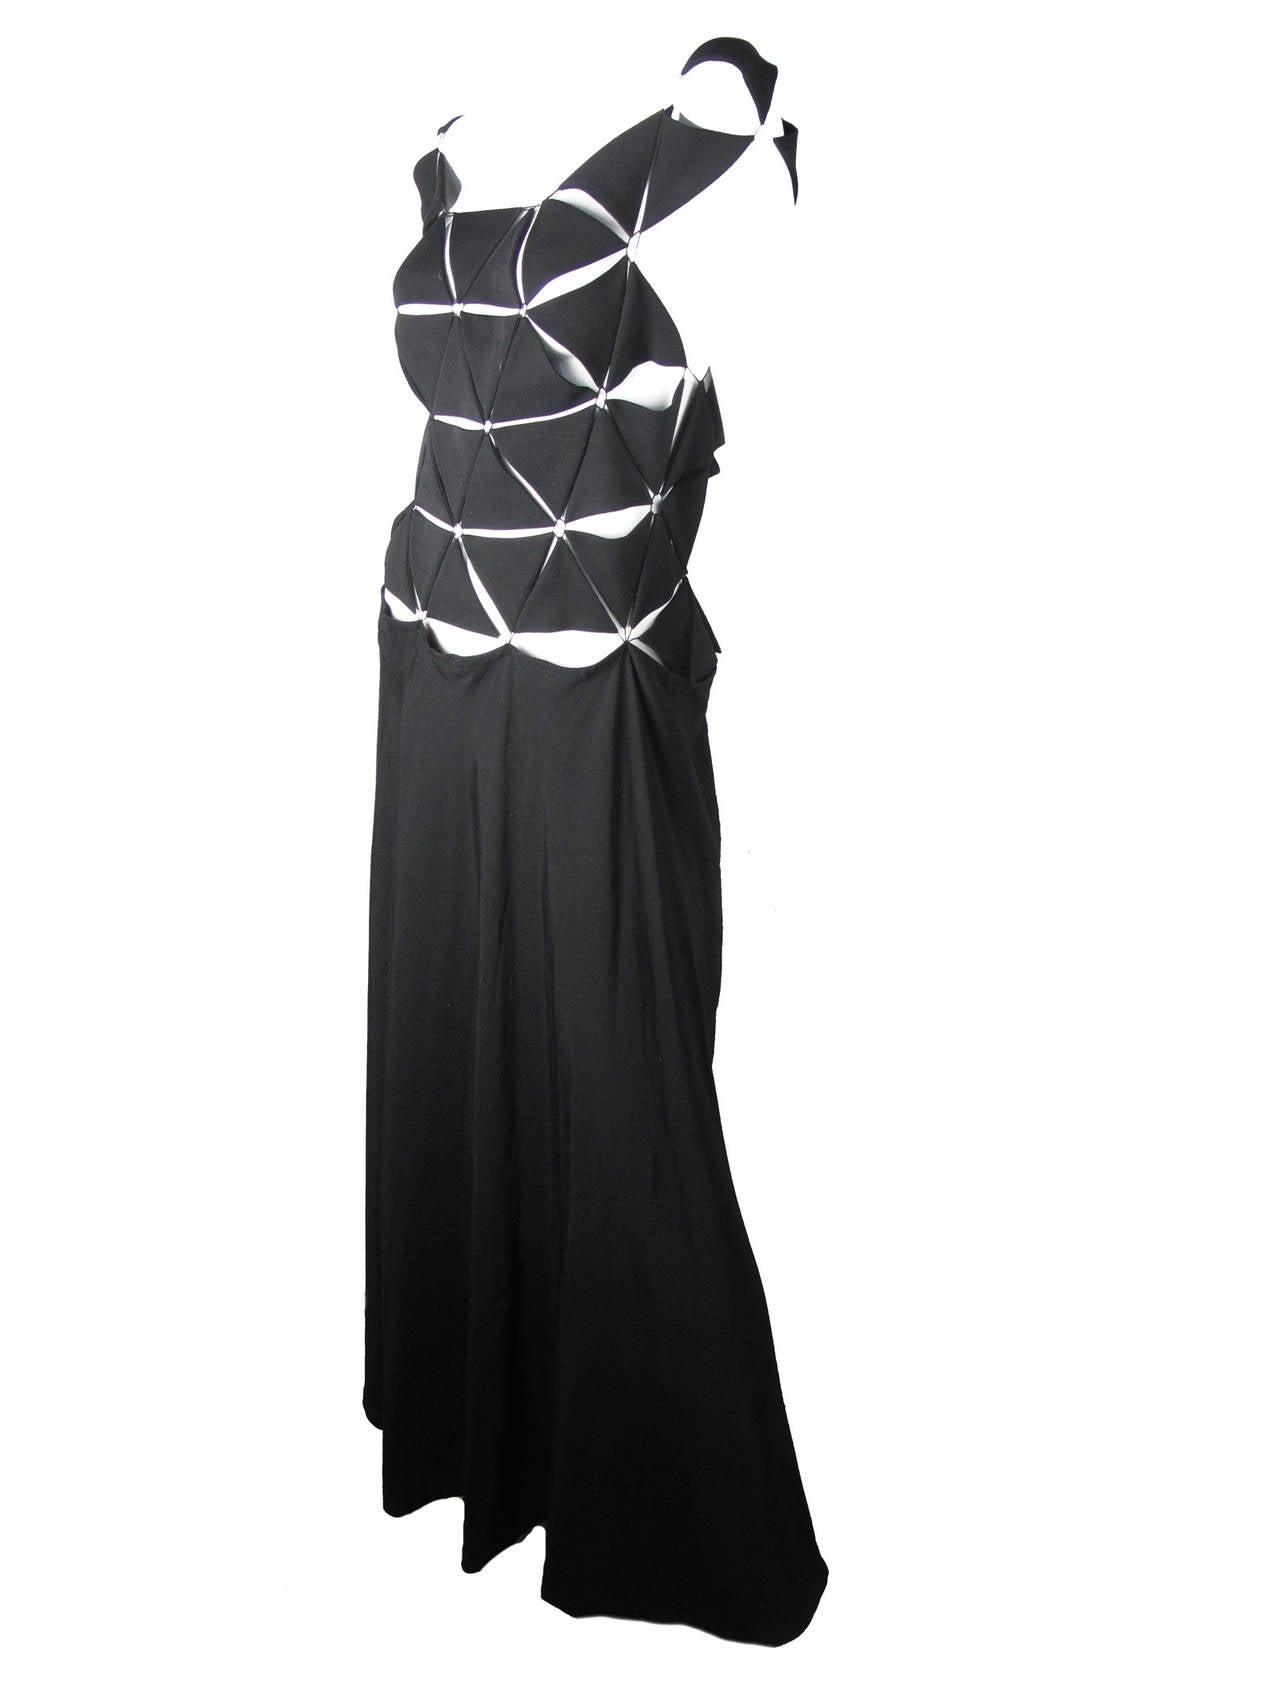 Yohji Yamamoto black rayon gown with square cut out design. Condition: Excellent, never worn, original tags still attached.  38